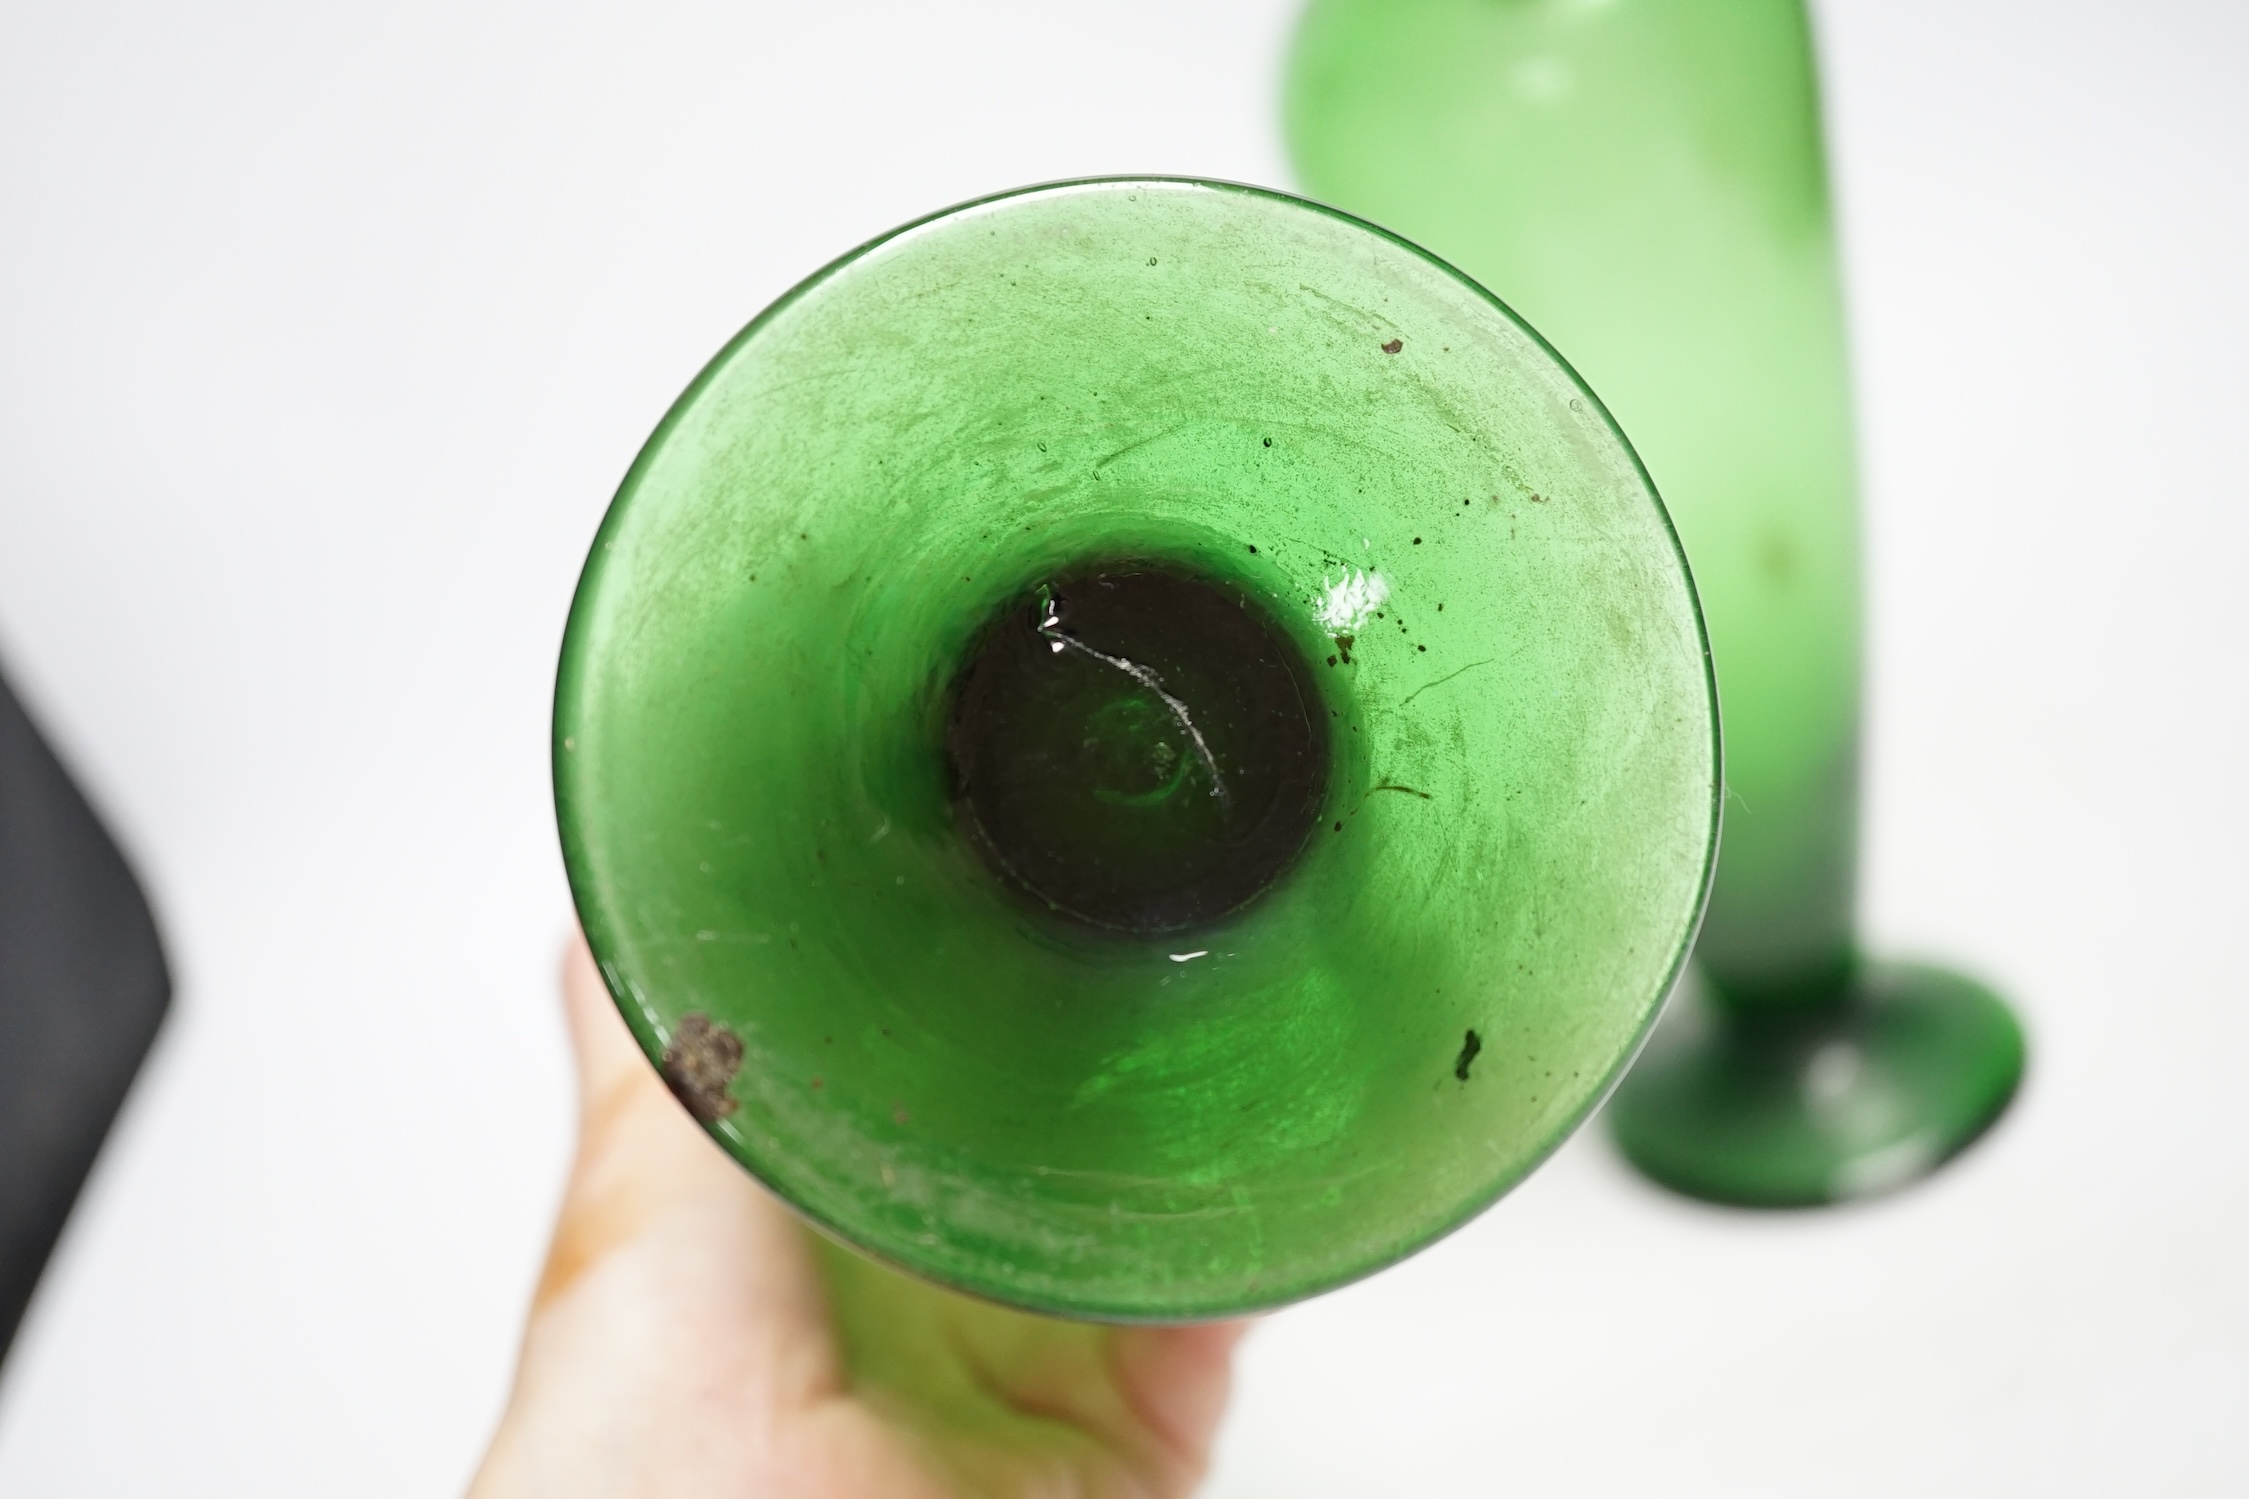 A pair of double handle green glass vases, 33cm